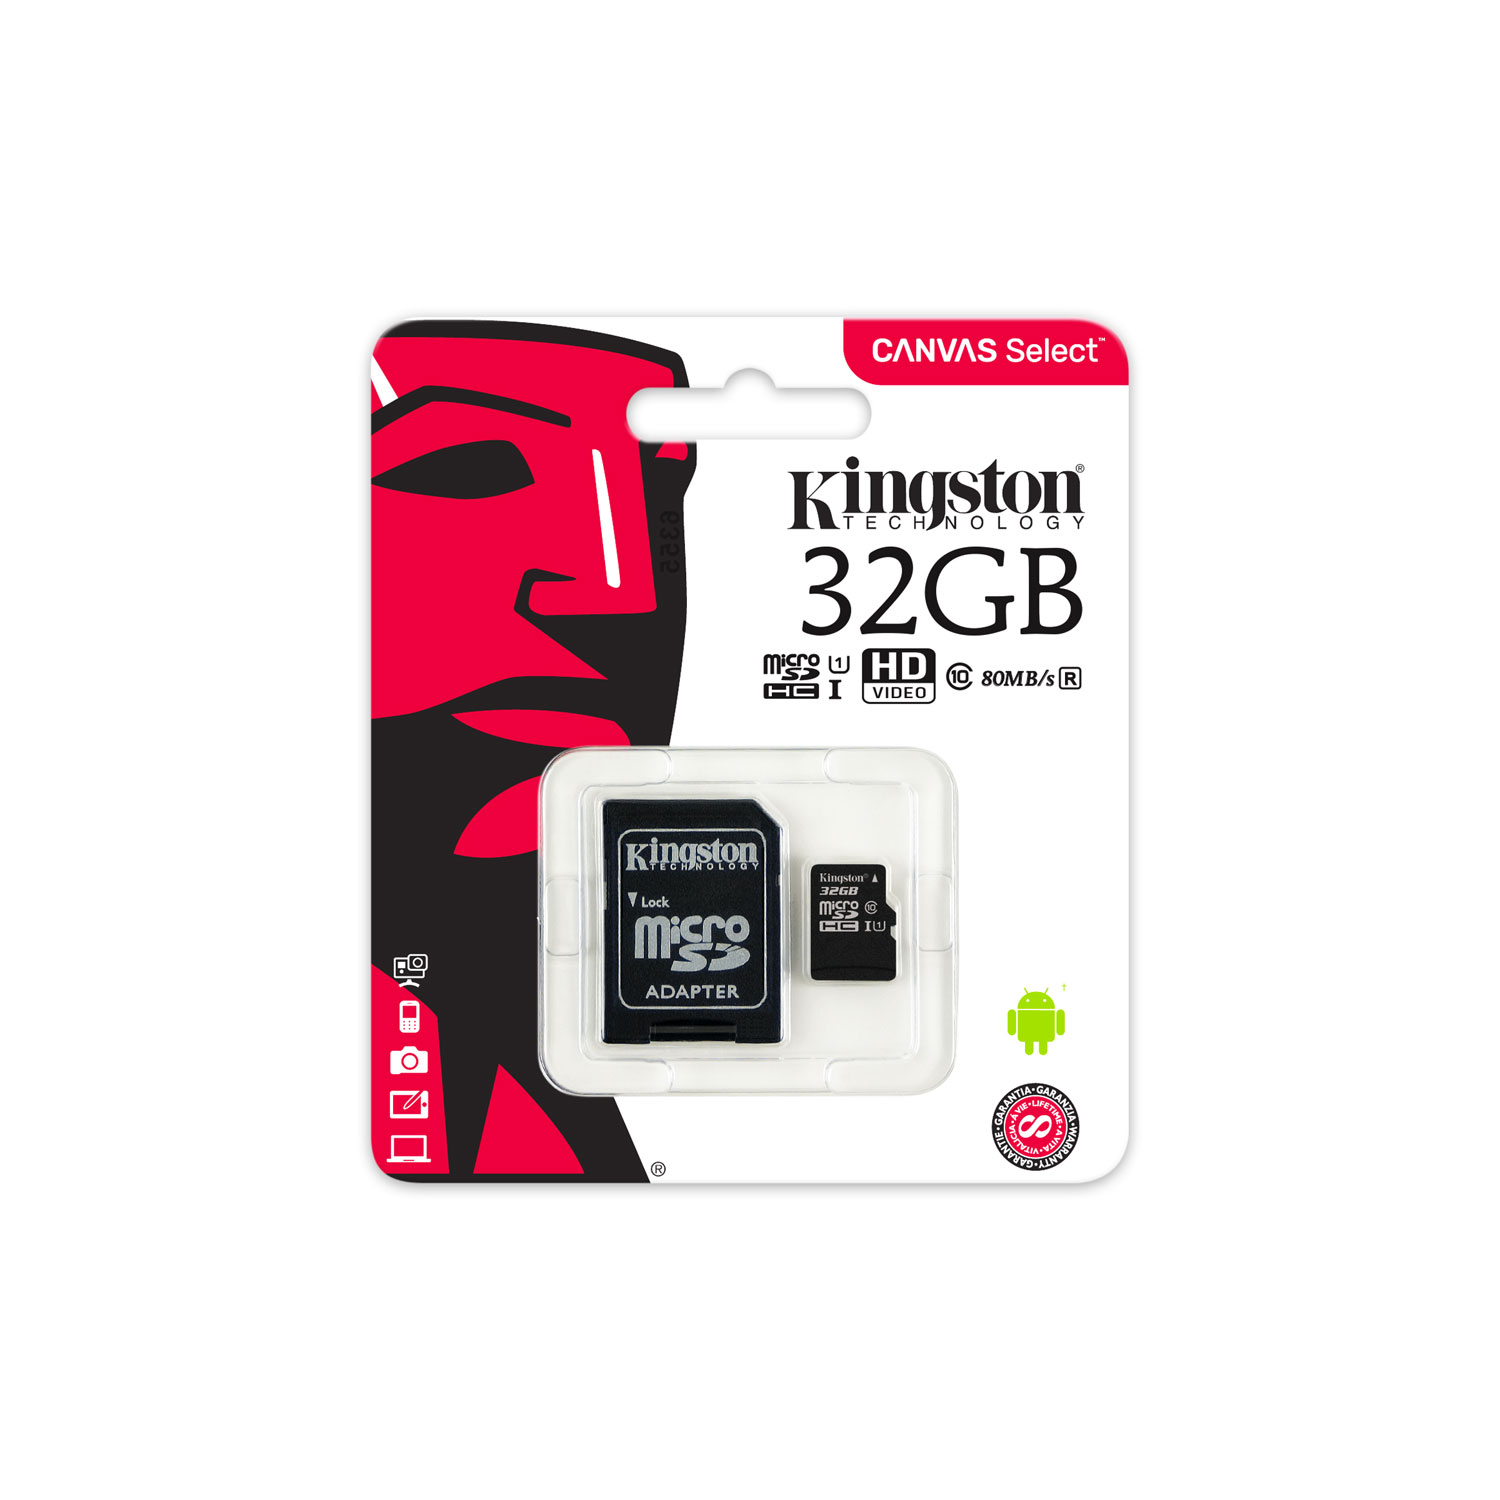 KINGSTON SD MICRO SD MEMORY CARDS FOR MOBILE PHONE OR CAMERA CHOOSE SIZE/TYPE 